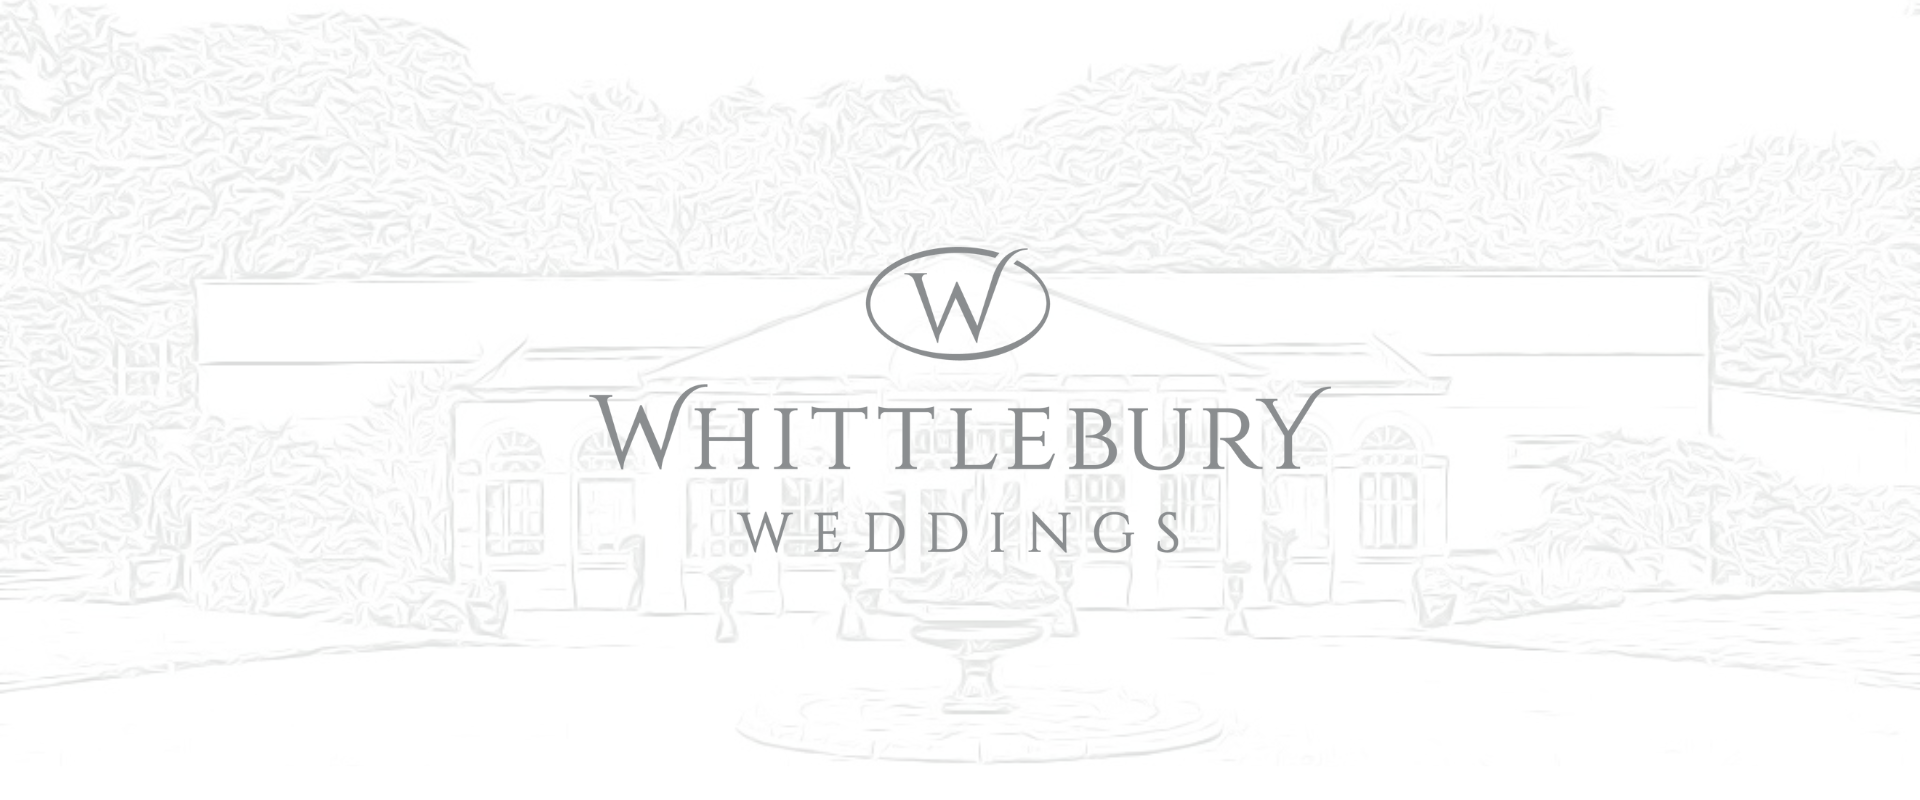 Drawing of Whittlebury Park's Orangery with the Whittlebury Weddings logo over the top in a silver colour